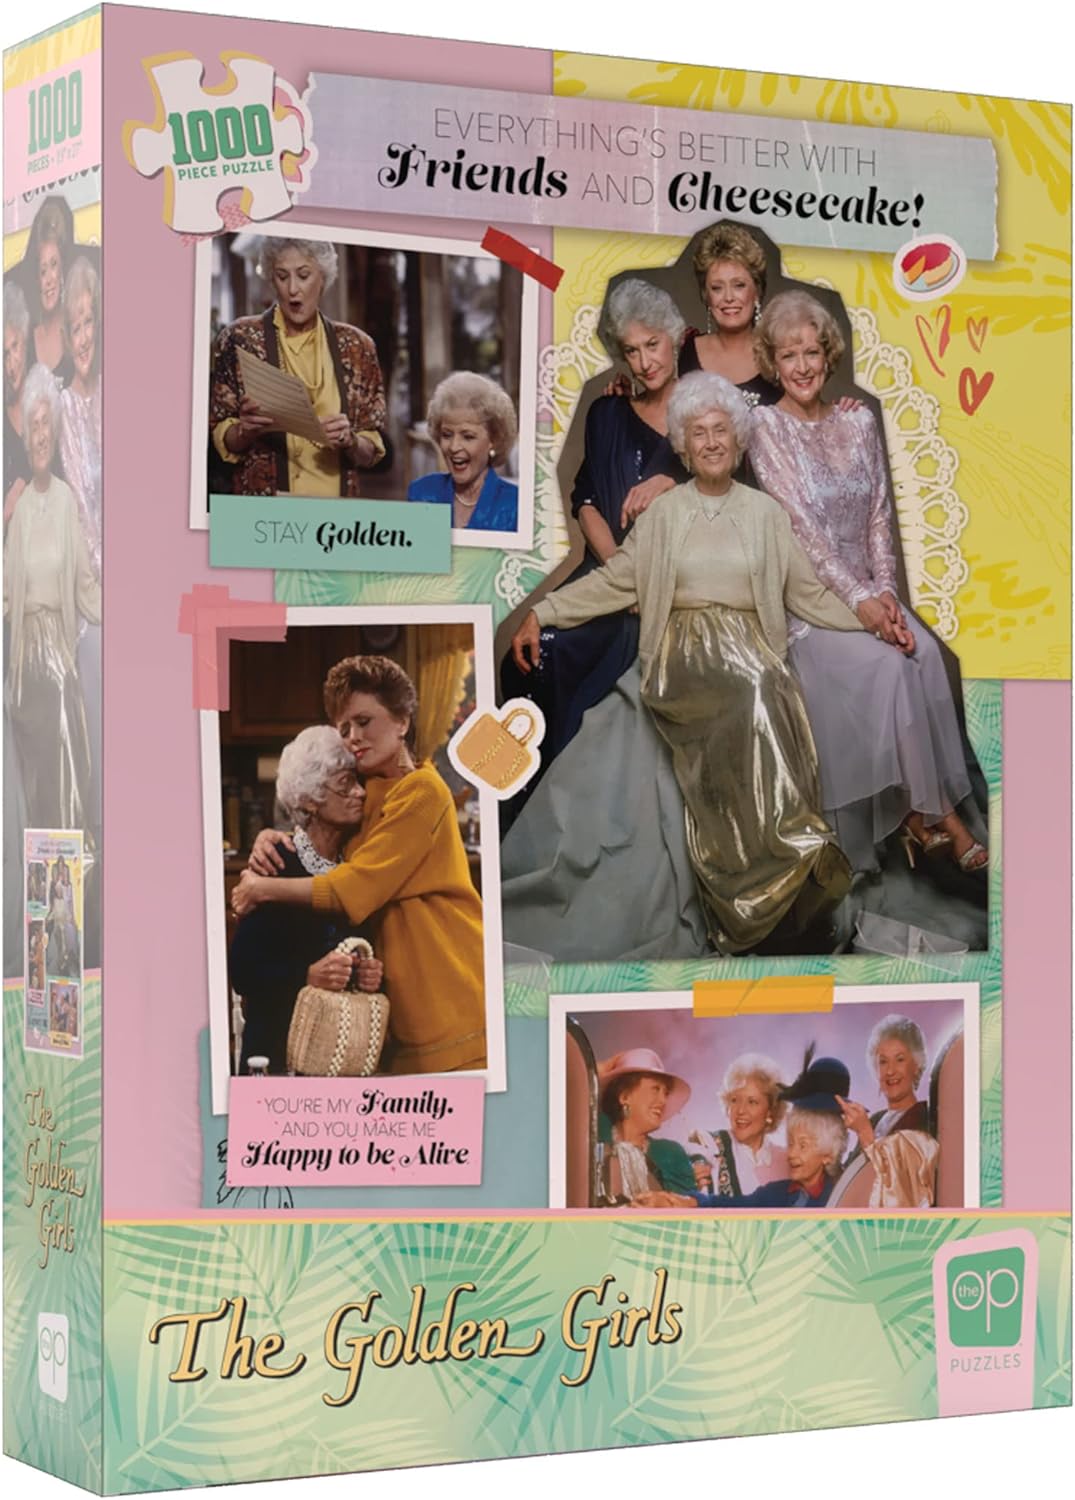 Puzzle - The Golden Girls “Everything’s Better with Friends and Cheesecake"